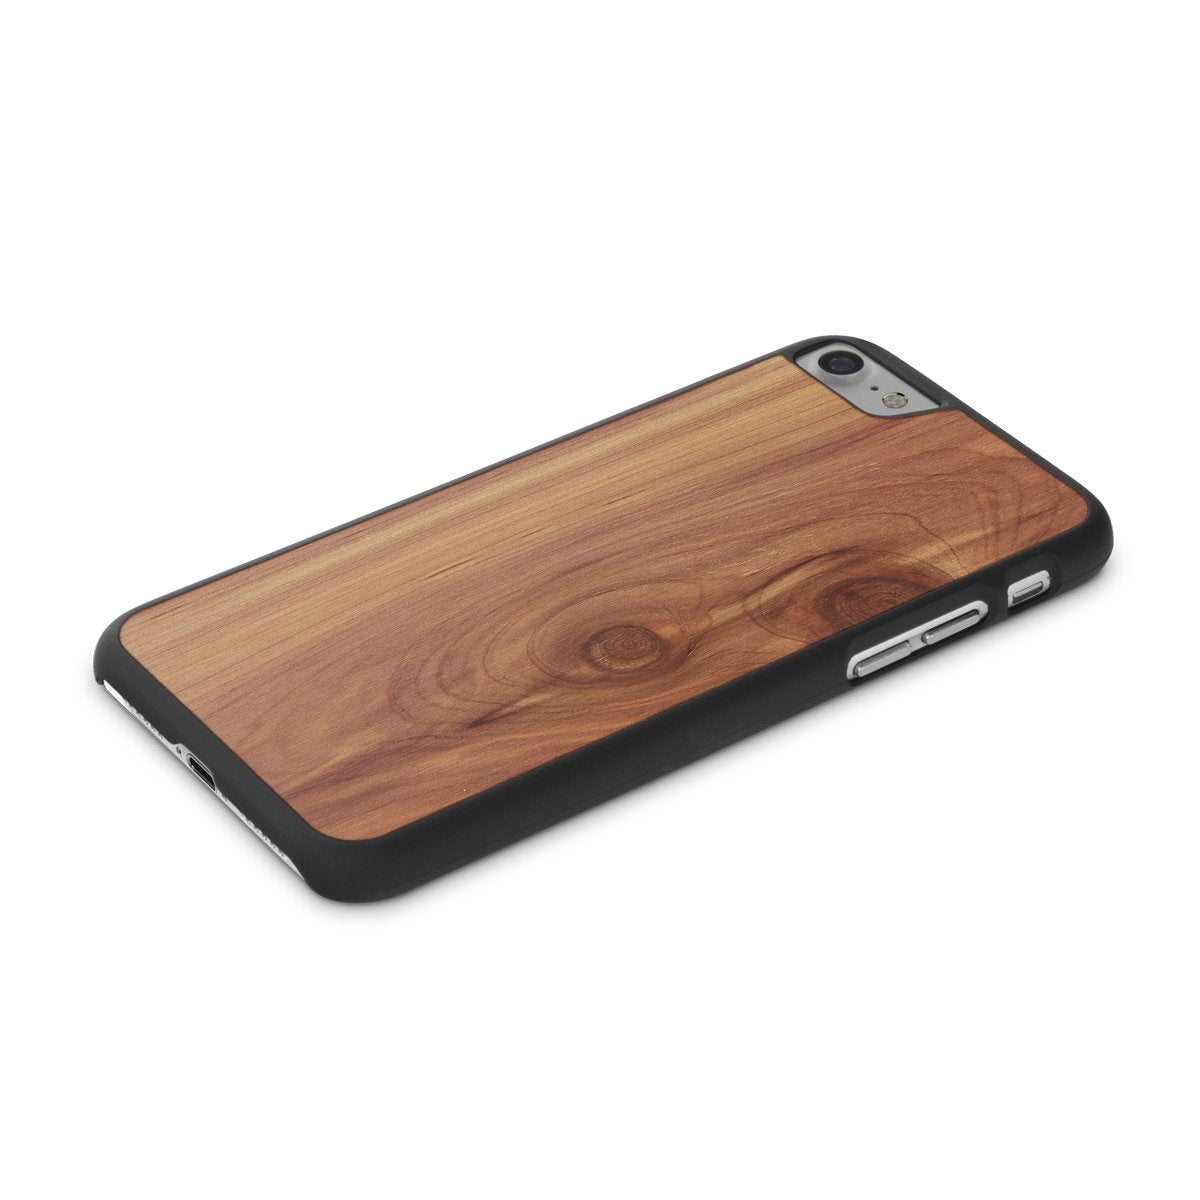 iPhone 8 —  #WoodBack Snap Case